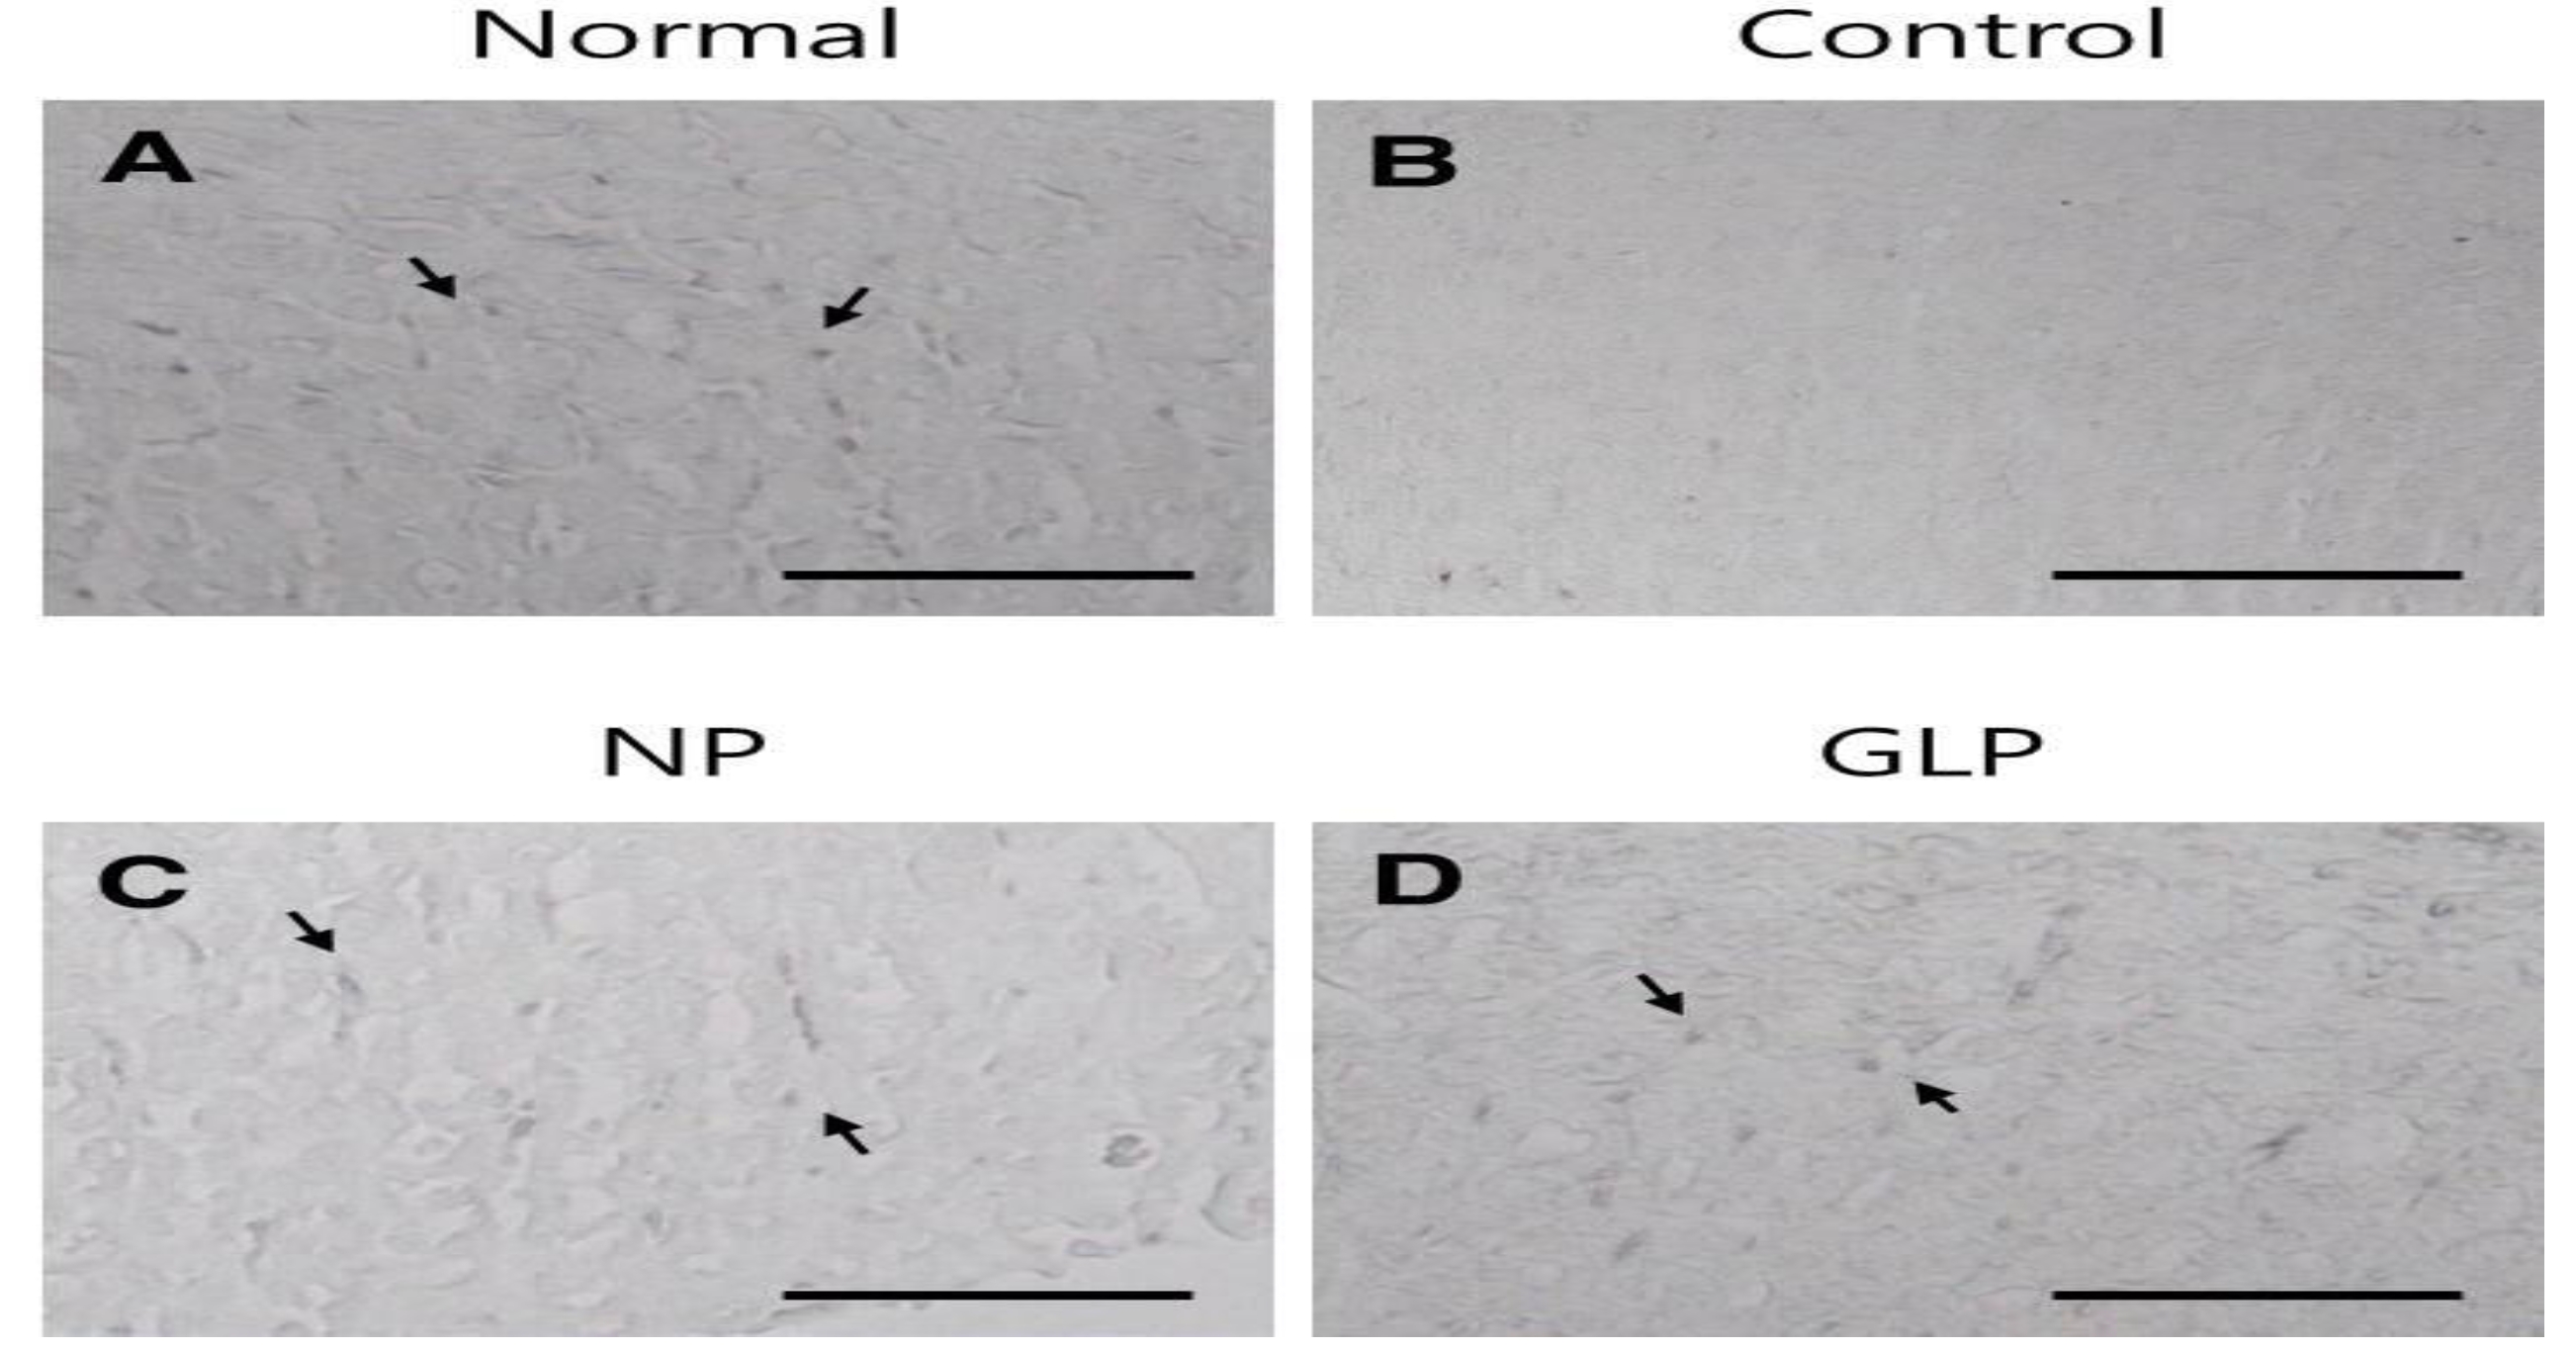 Immunohistochemical staining of Bcl-2 proteins in EtOH-induced chronic gastric ulcers in rats.